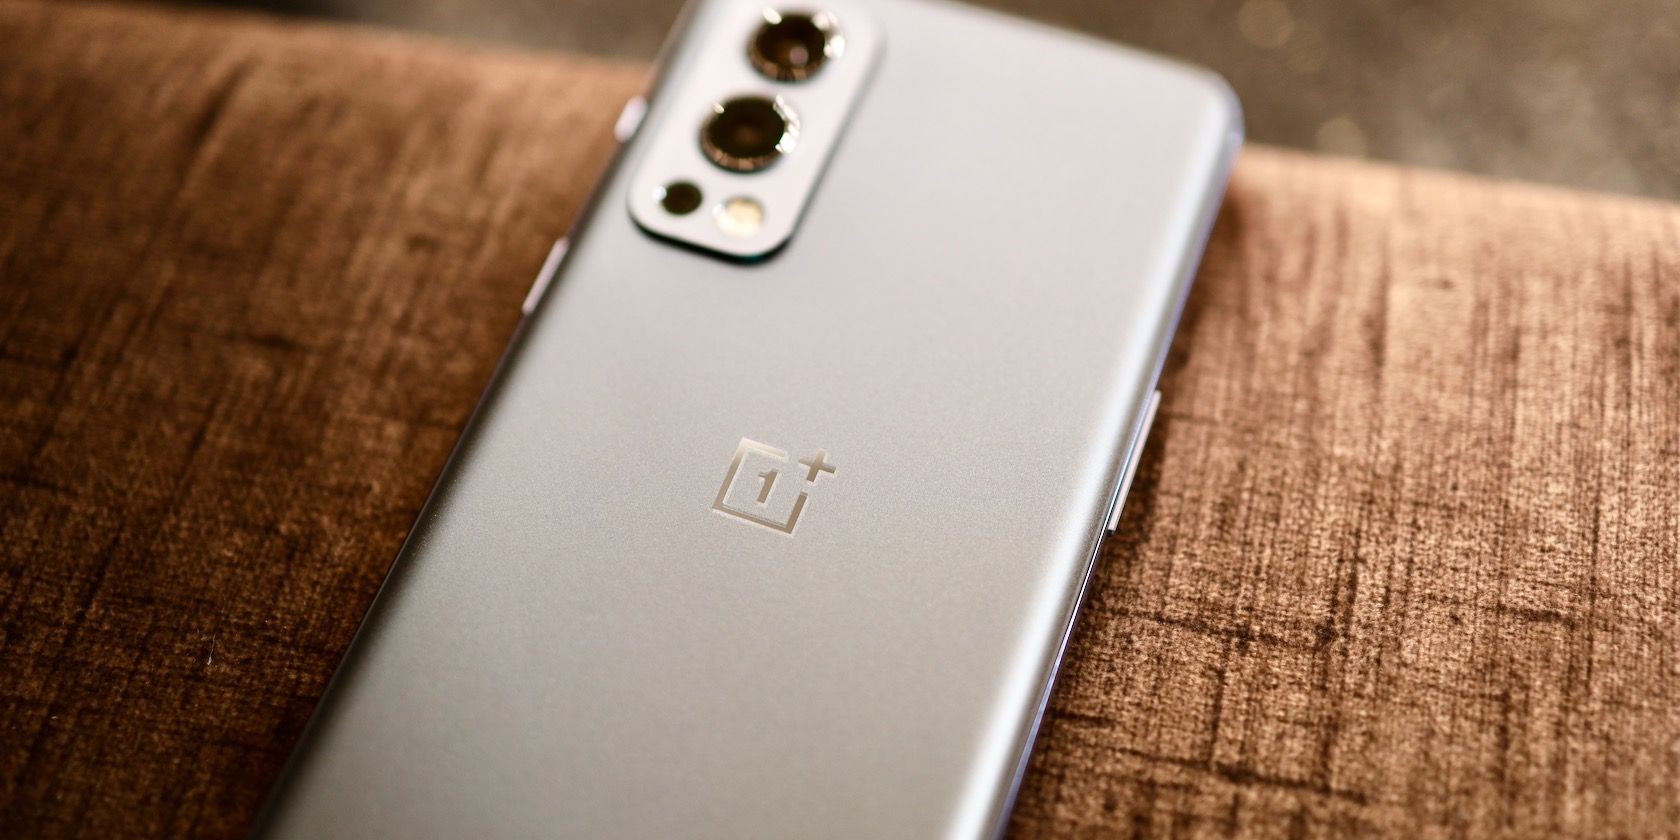 oneplus nord 2 featured